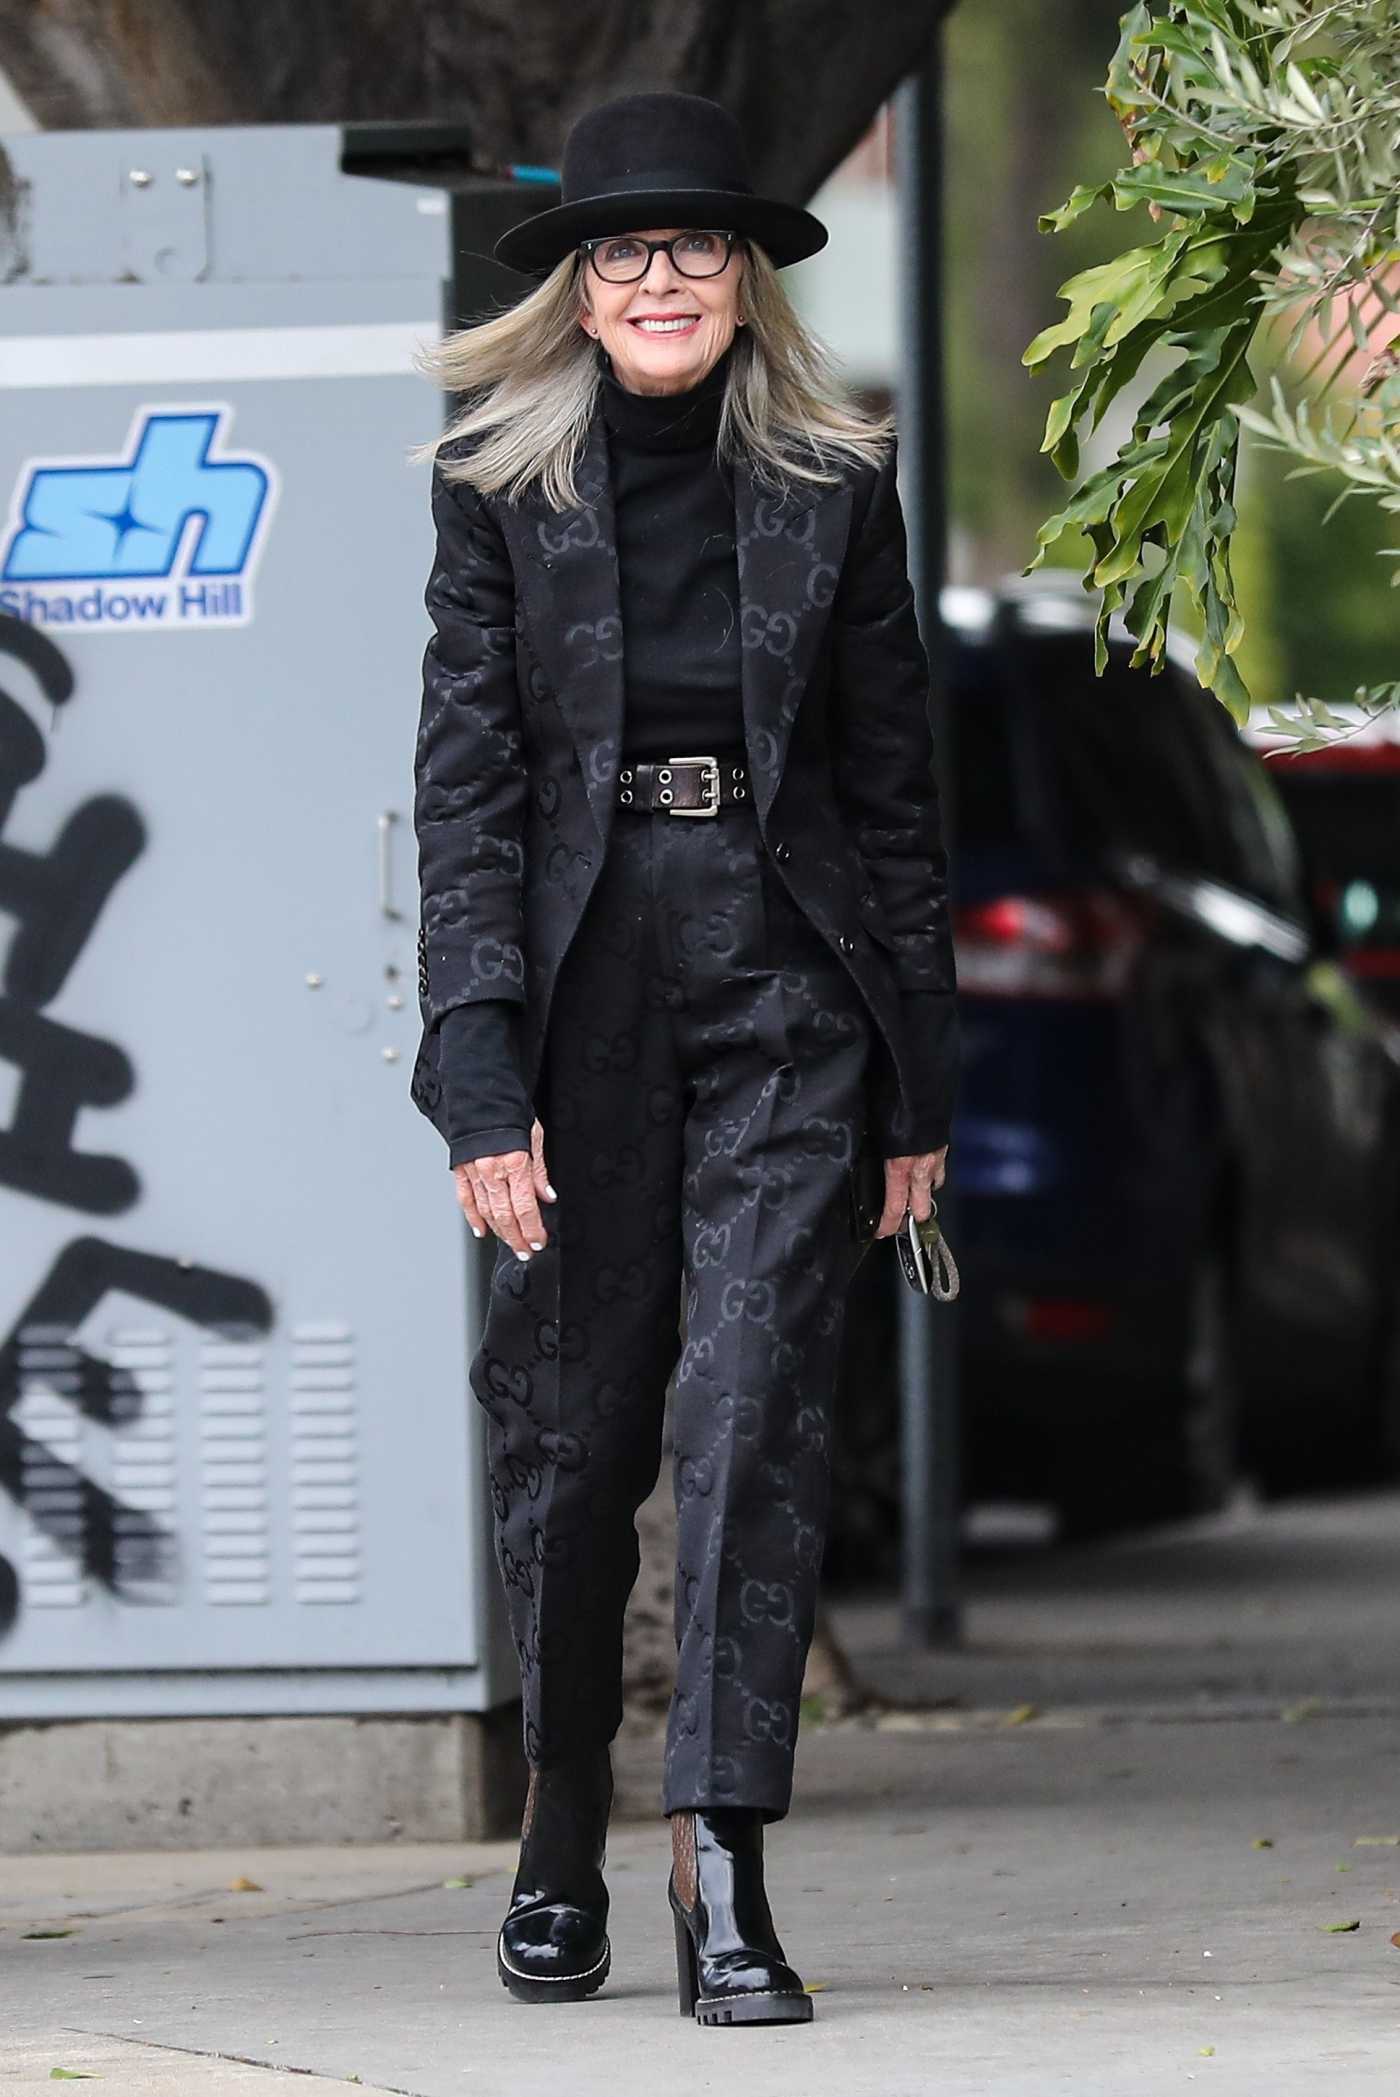 Diane Keaton in a Black Outfit Goes Shopping in Beverly Hills 03/31/2023